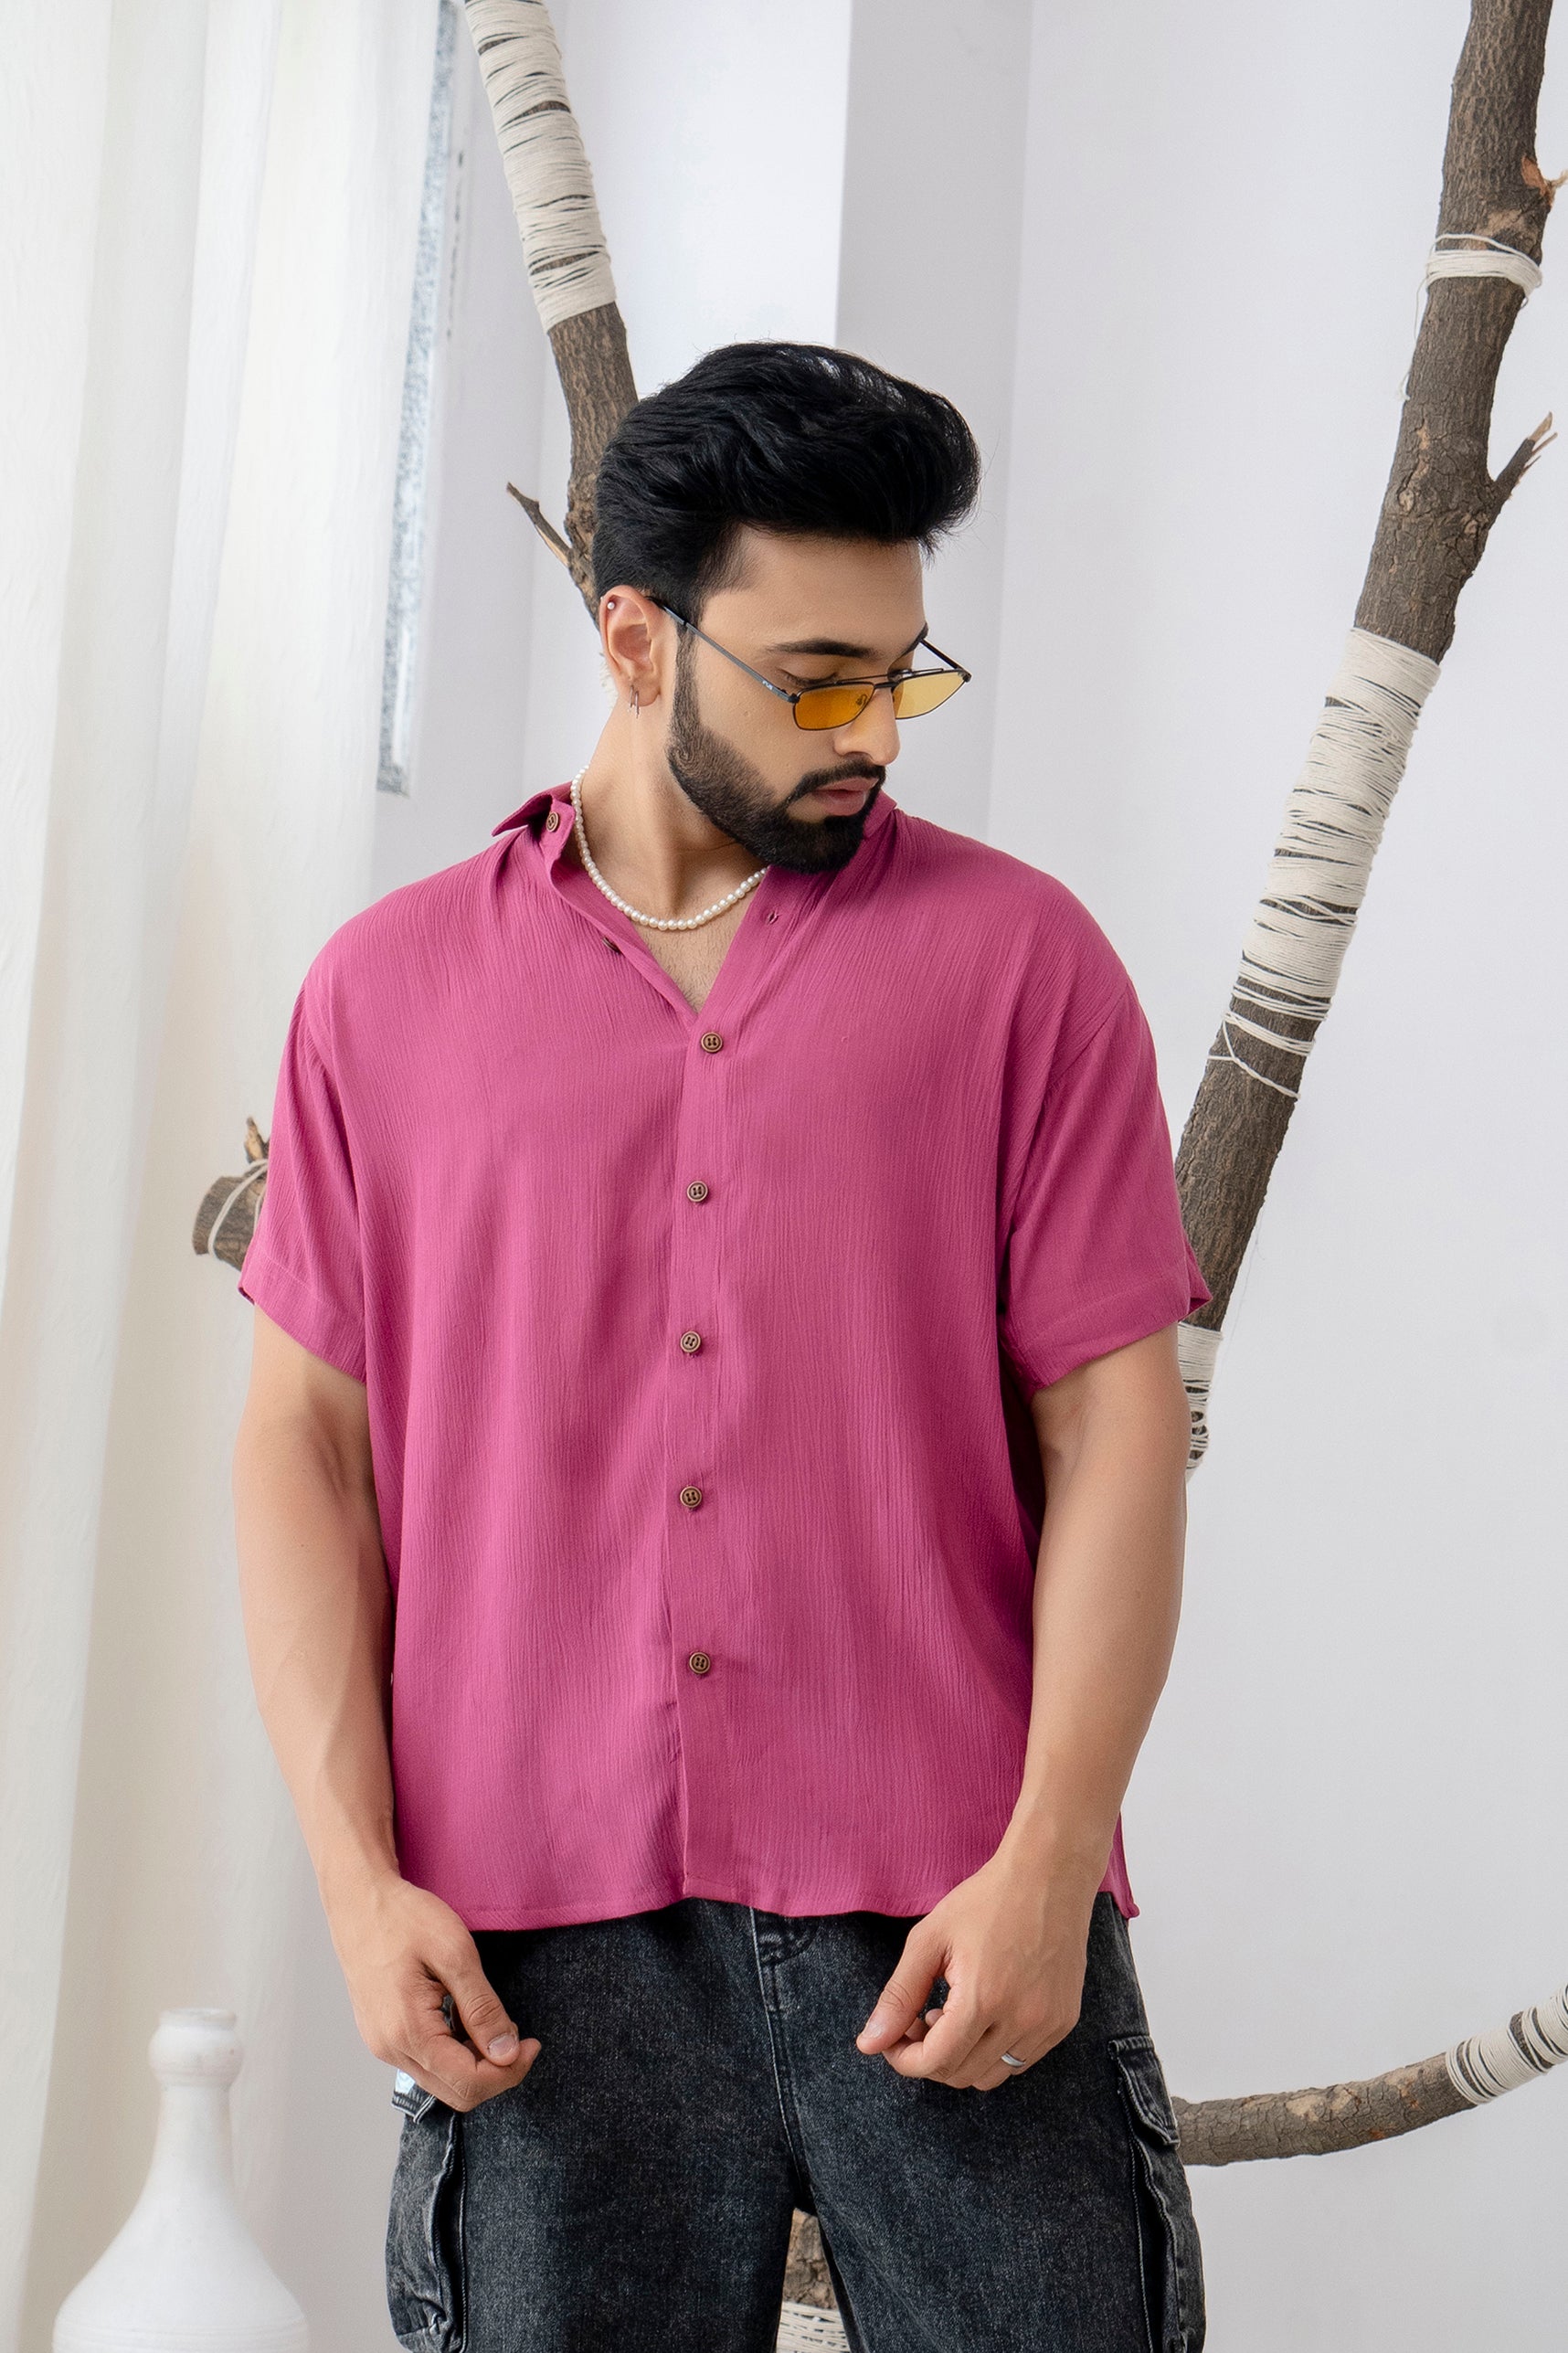 Firangi Yarn Relaxed Fit Solid Super Flowy Re-engineered Cotton- Half Sleeves Party Shirt Cranberry Pink